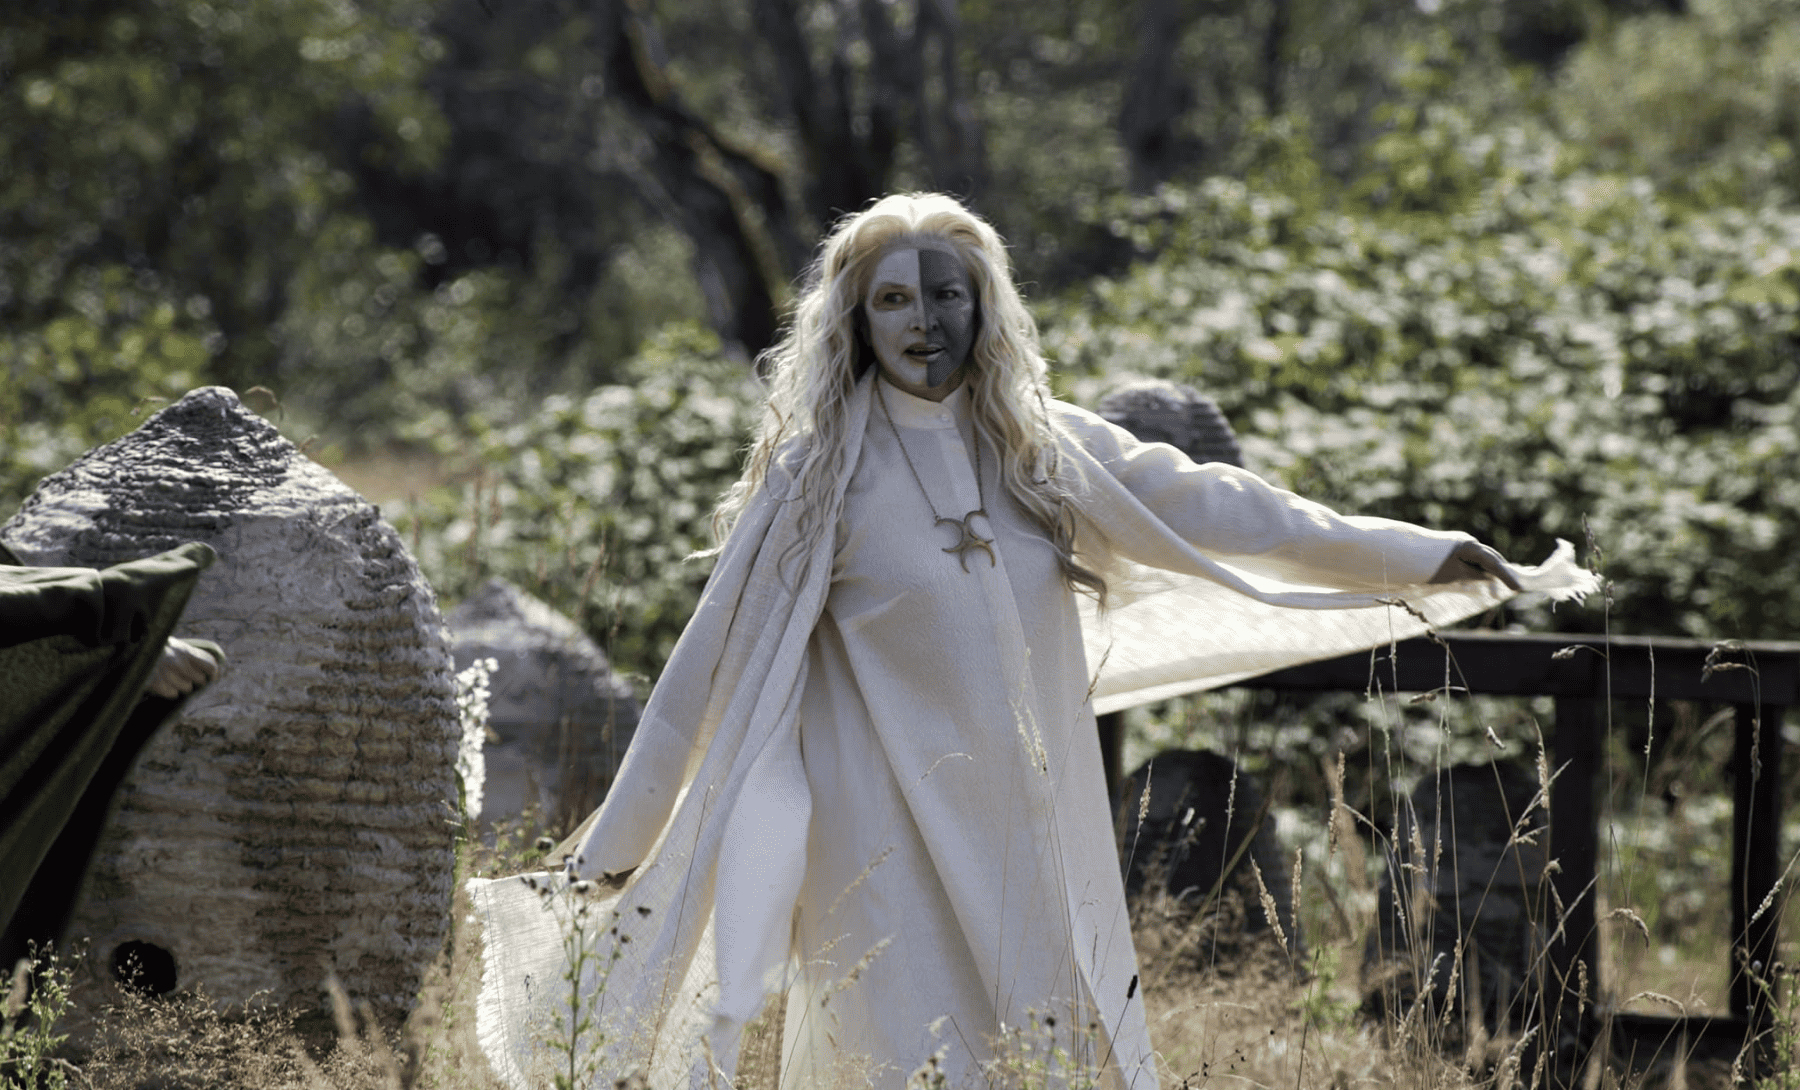 A neo-pagan woman with her face half-painted blue and dressed in a white, flowy dress seems to walk airplane-style across a field in this image from Warner Bros.